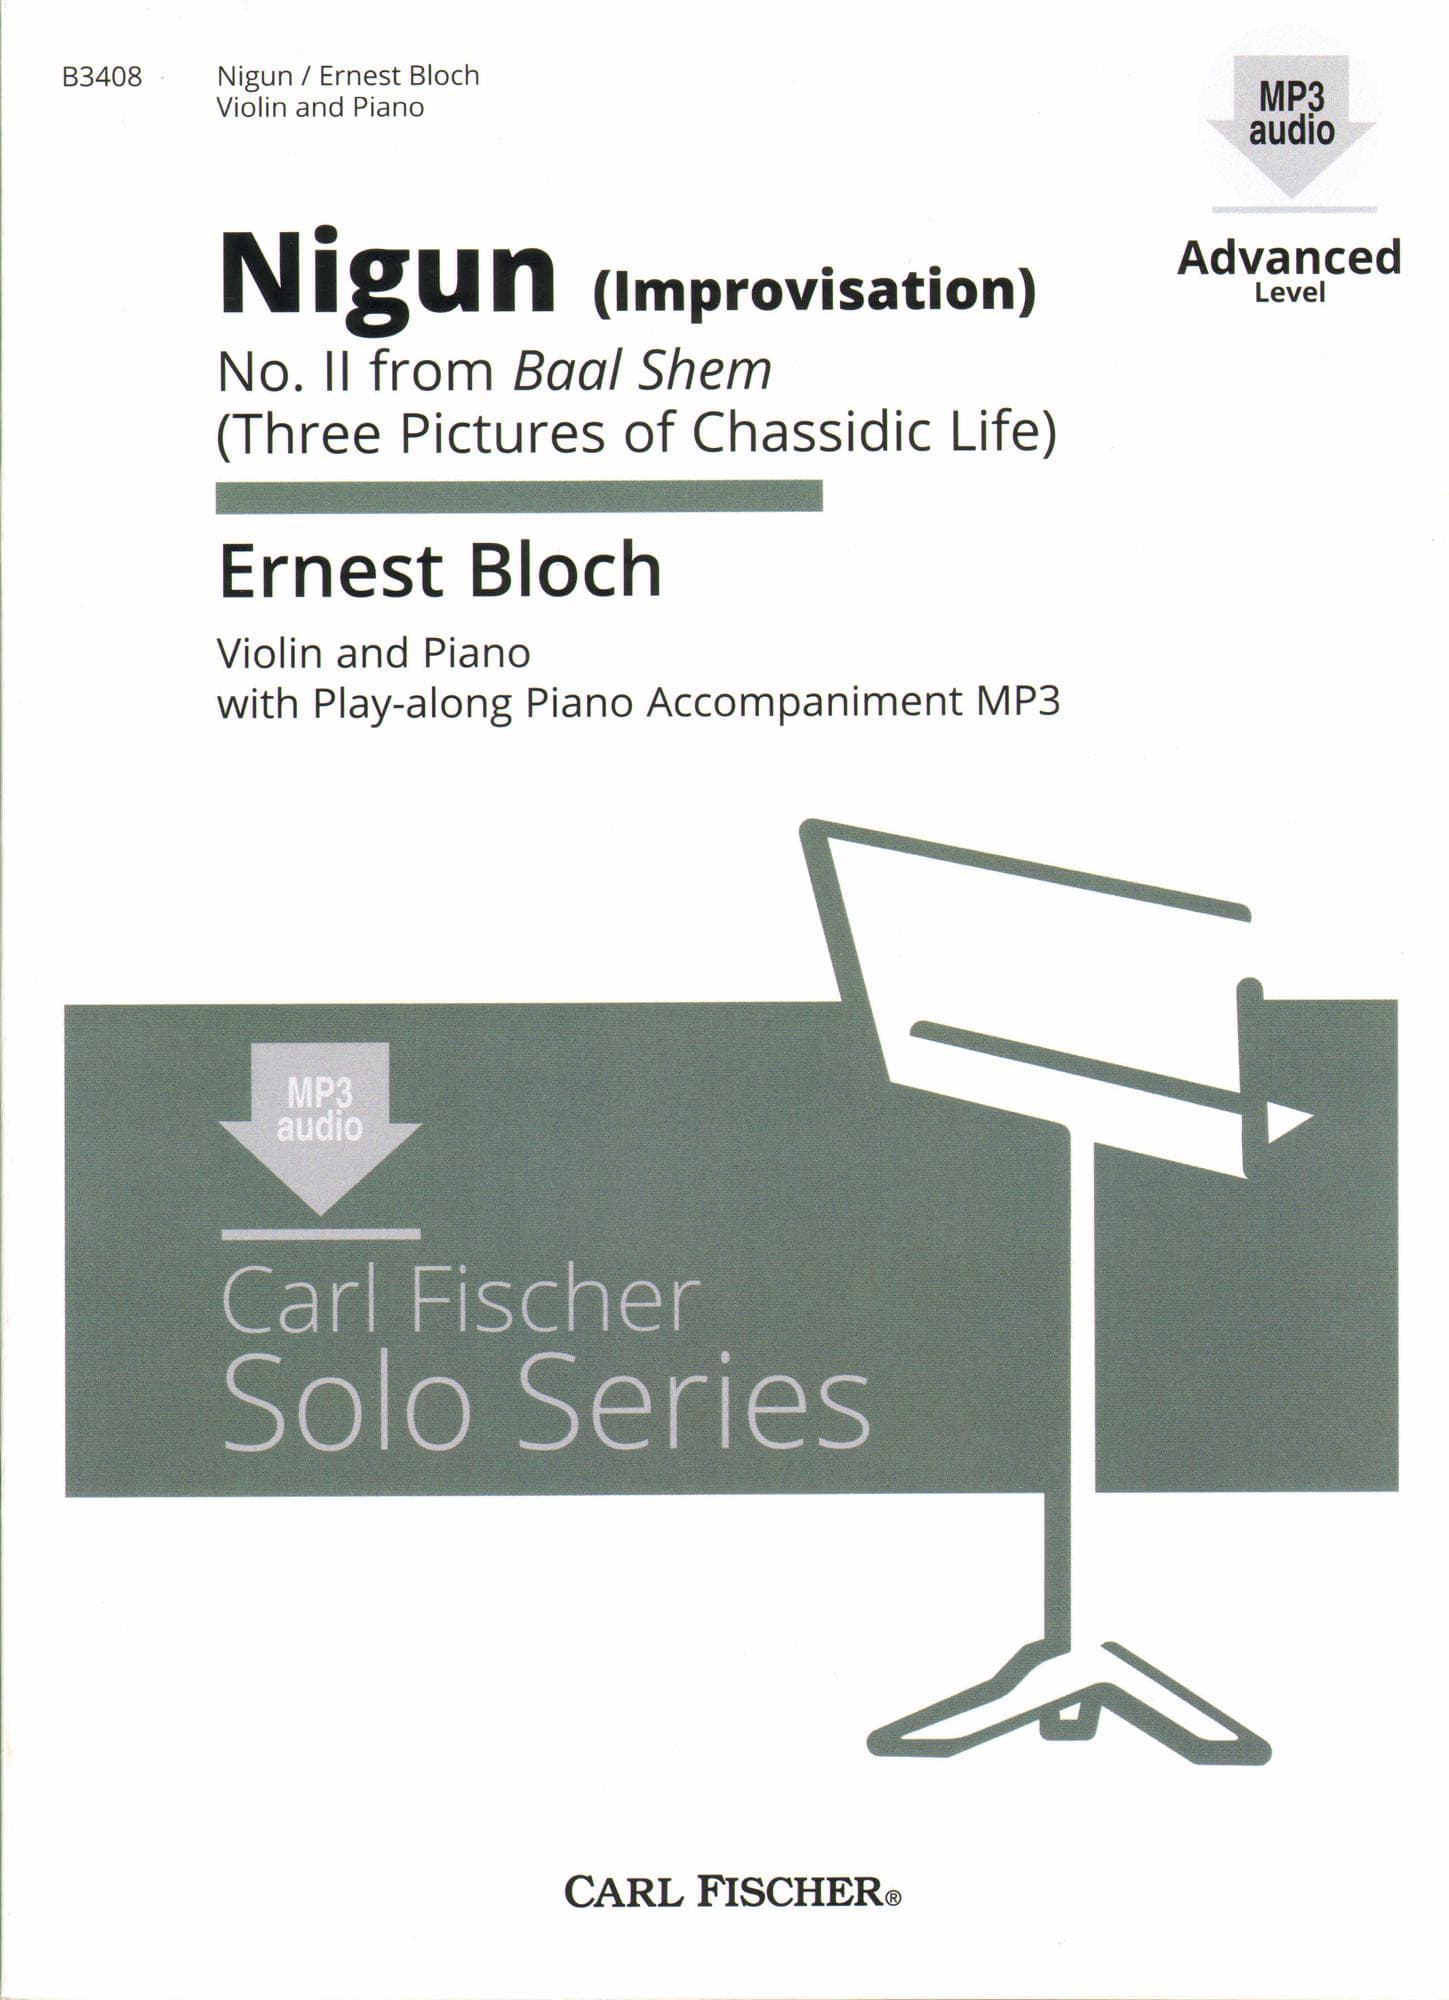 Bloch, Ernest - Nigun (Improvisation) No. 2 from "Baal Shem" (Three Pictures of Chassidic Life) - for Violin with Piano or Audio Accompaniment - Carl Fischer